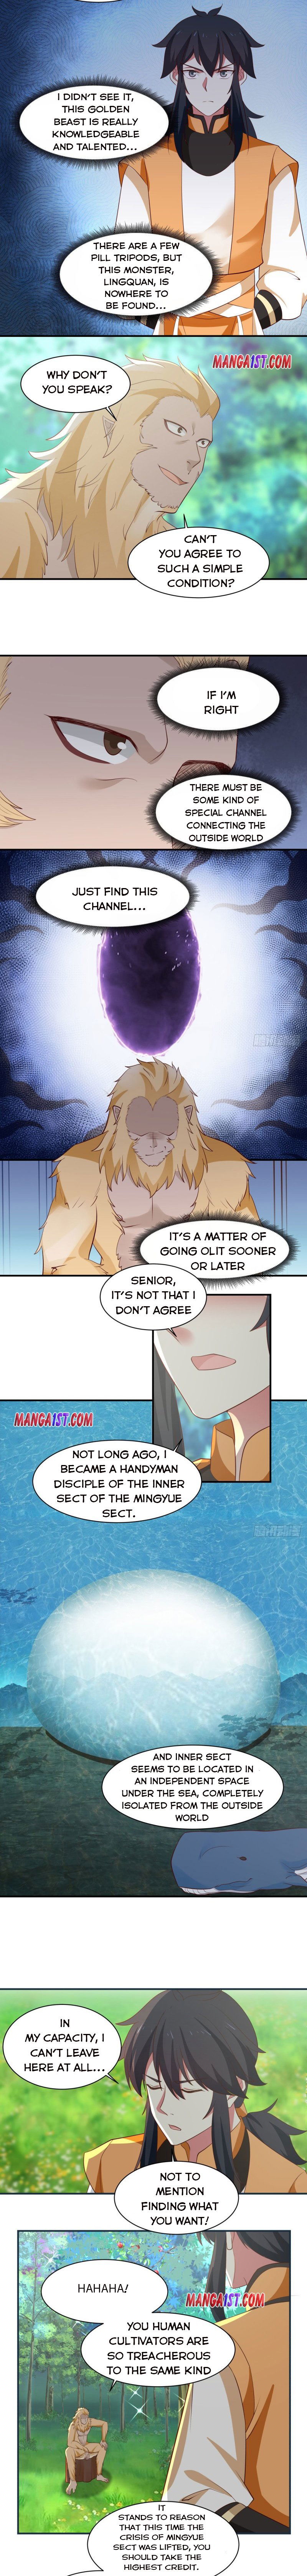 Chaos Alchemist Chapter 157 page 2